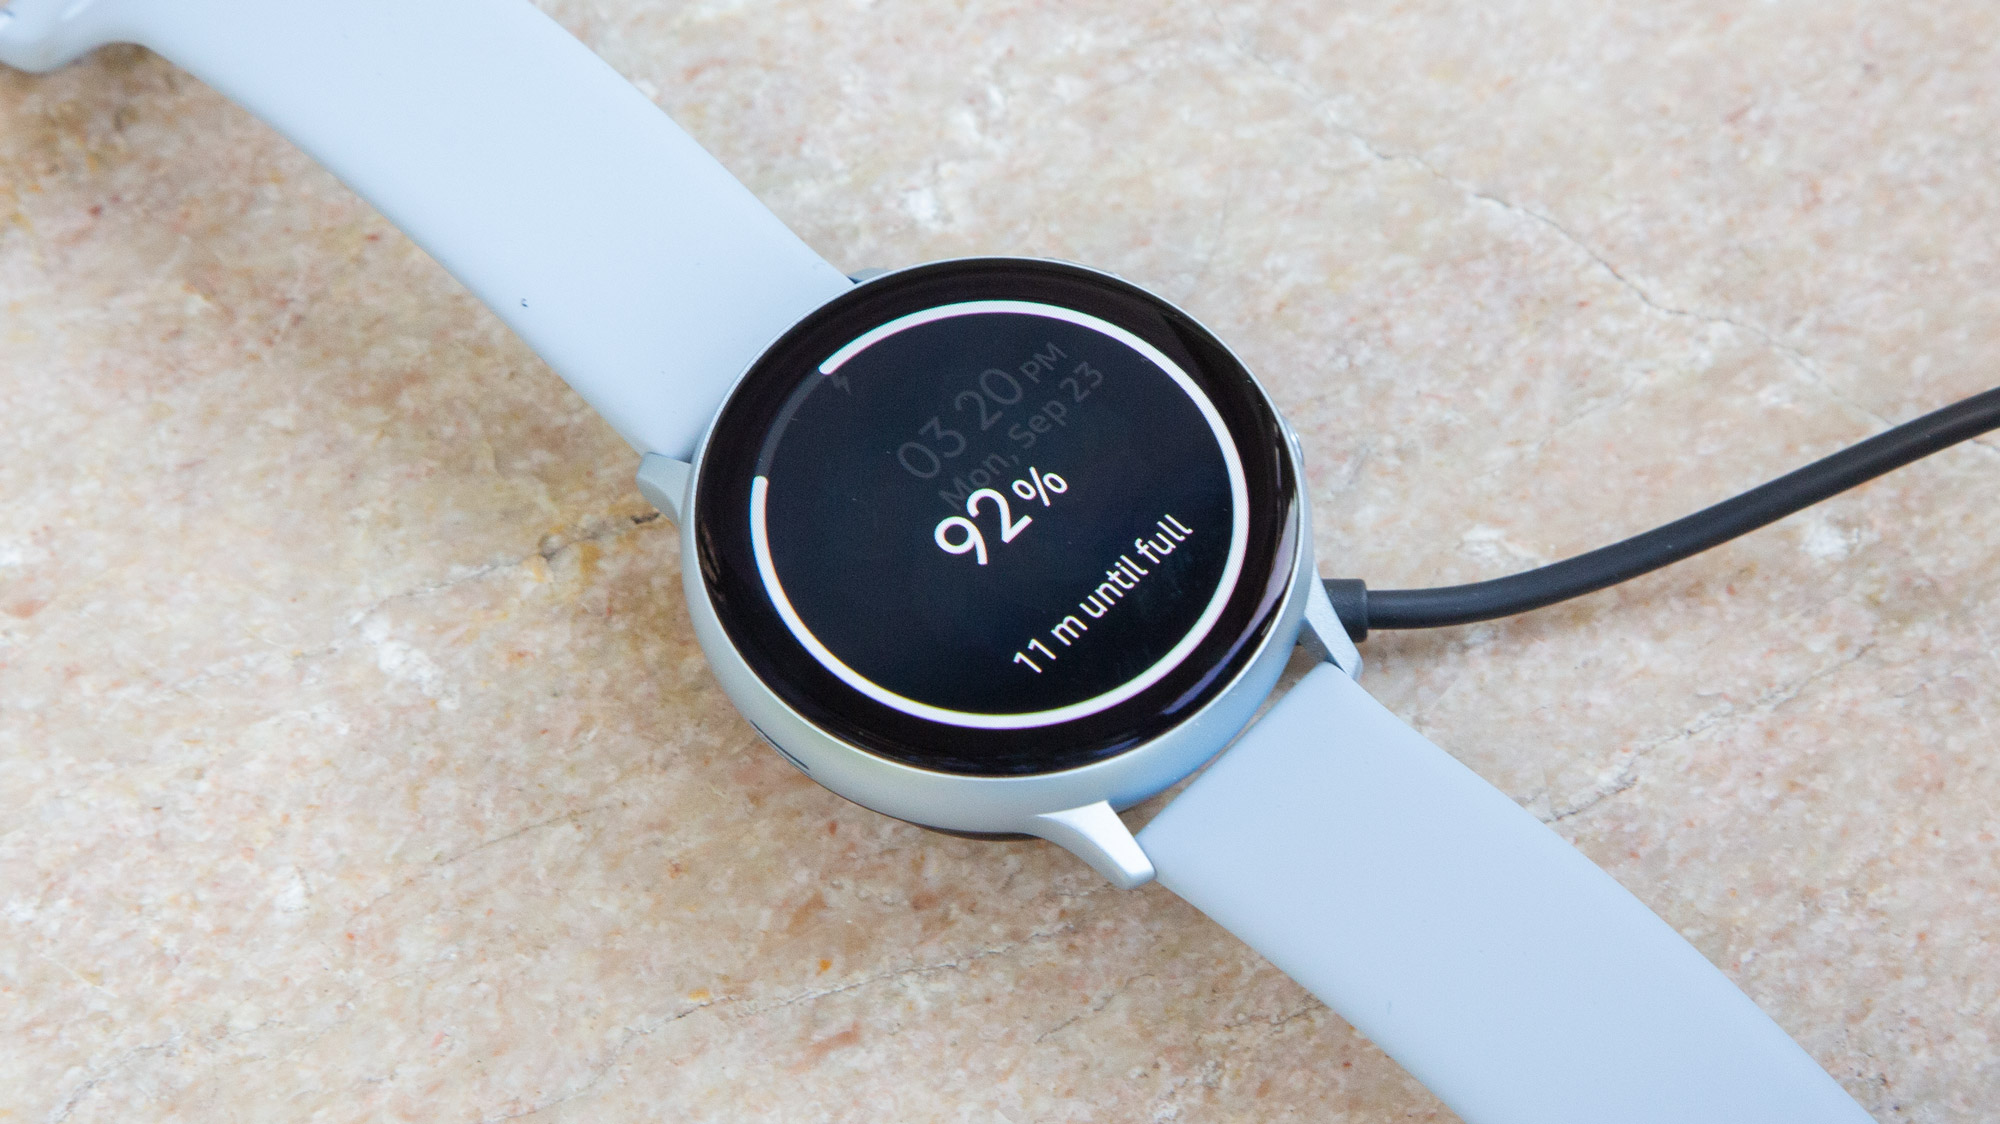 Specs of Samsung Galaxy Watch 3 have leaked online